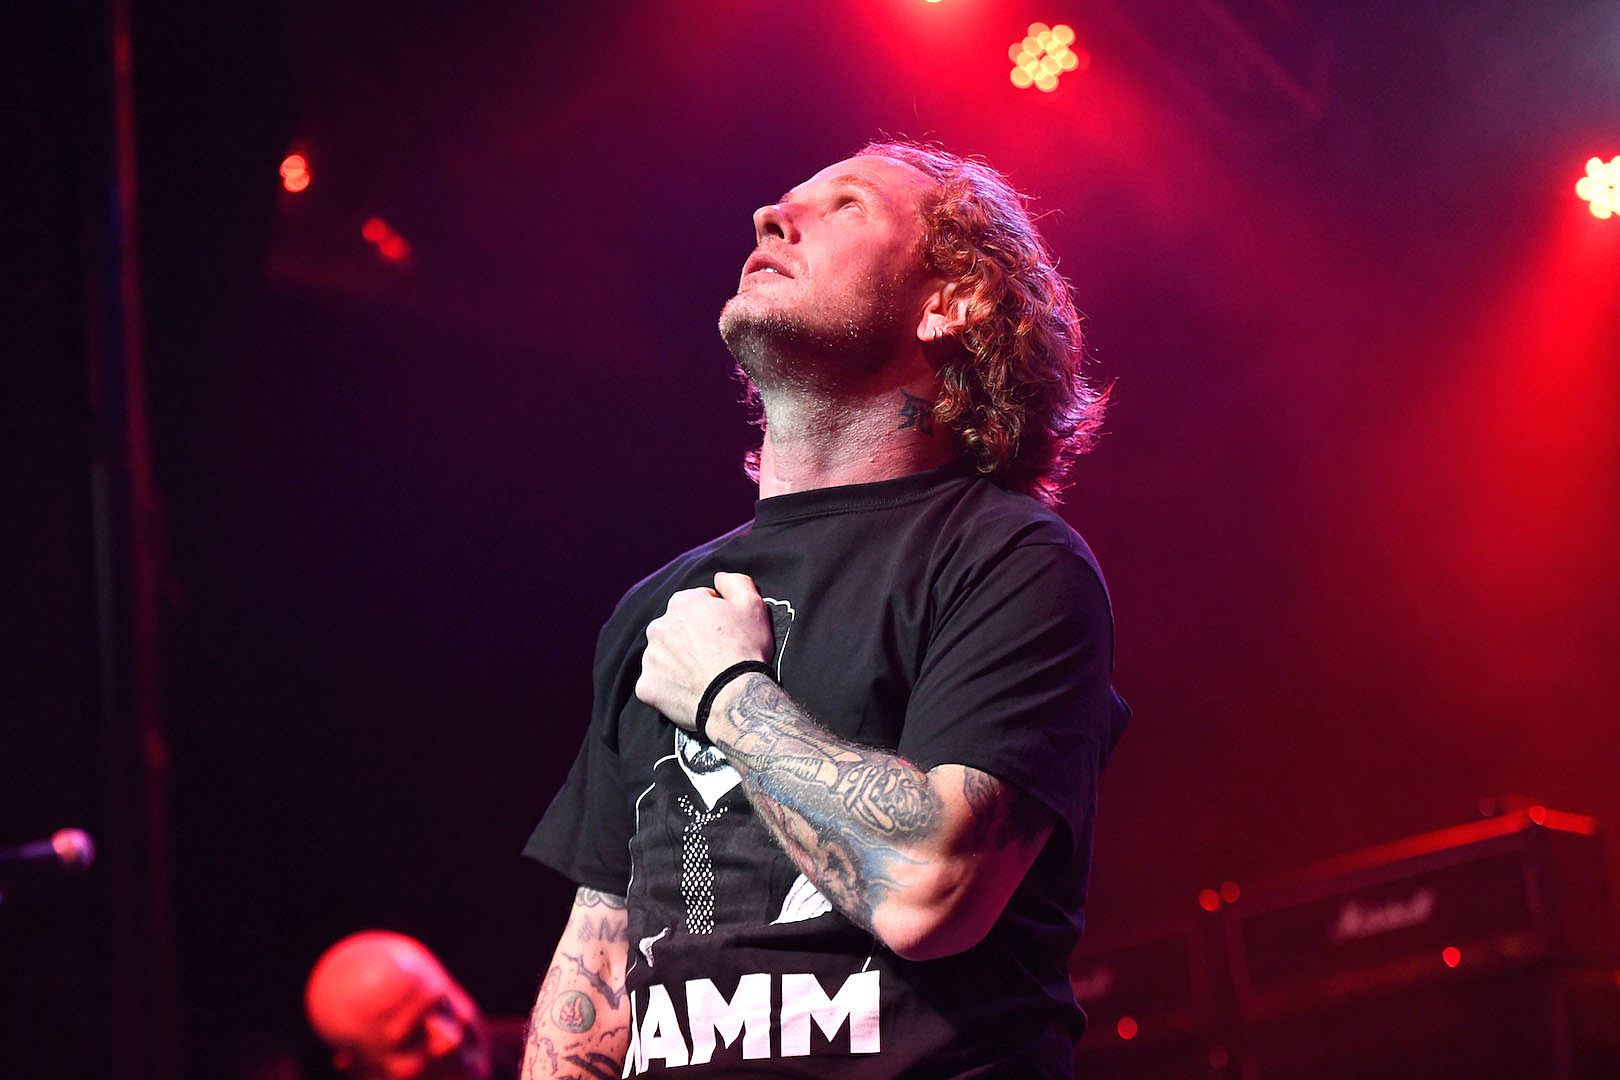 14 Songs Featuring The Great Big Mouth Corey Taylor As a Guest